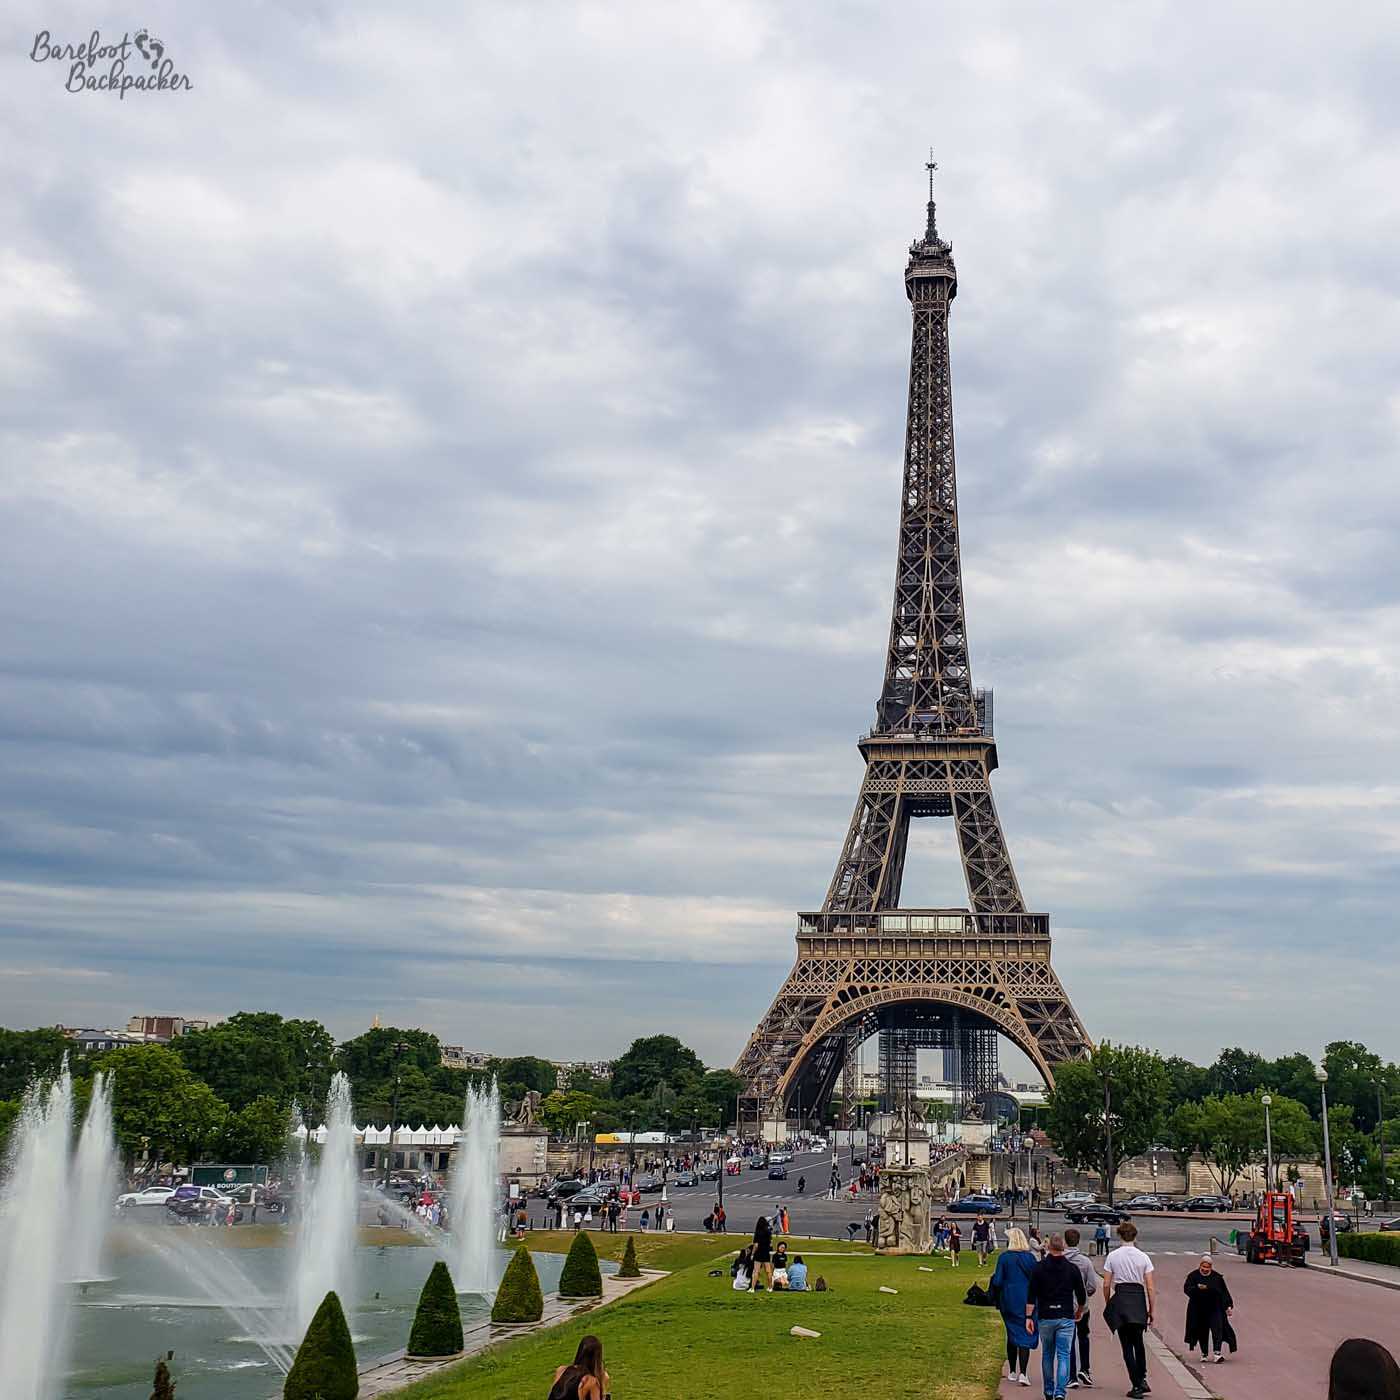 Moody cloudy skies in the background lurk behind an image of the Eiffel Tower, a toer made of a framework of metal, starting at arches and tapering to a point at the top. In front are a busy street, some low trees, and, in the foreground on the left, a couple of small geyser-like water sprays near where some people are sat on grass.